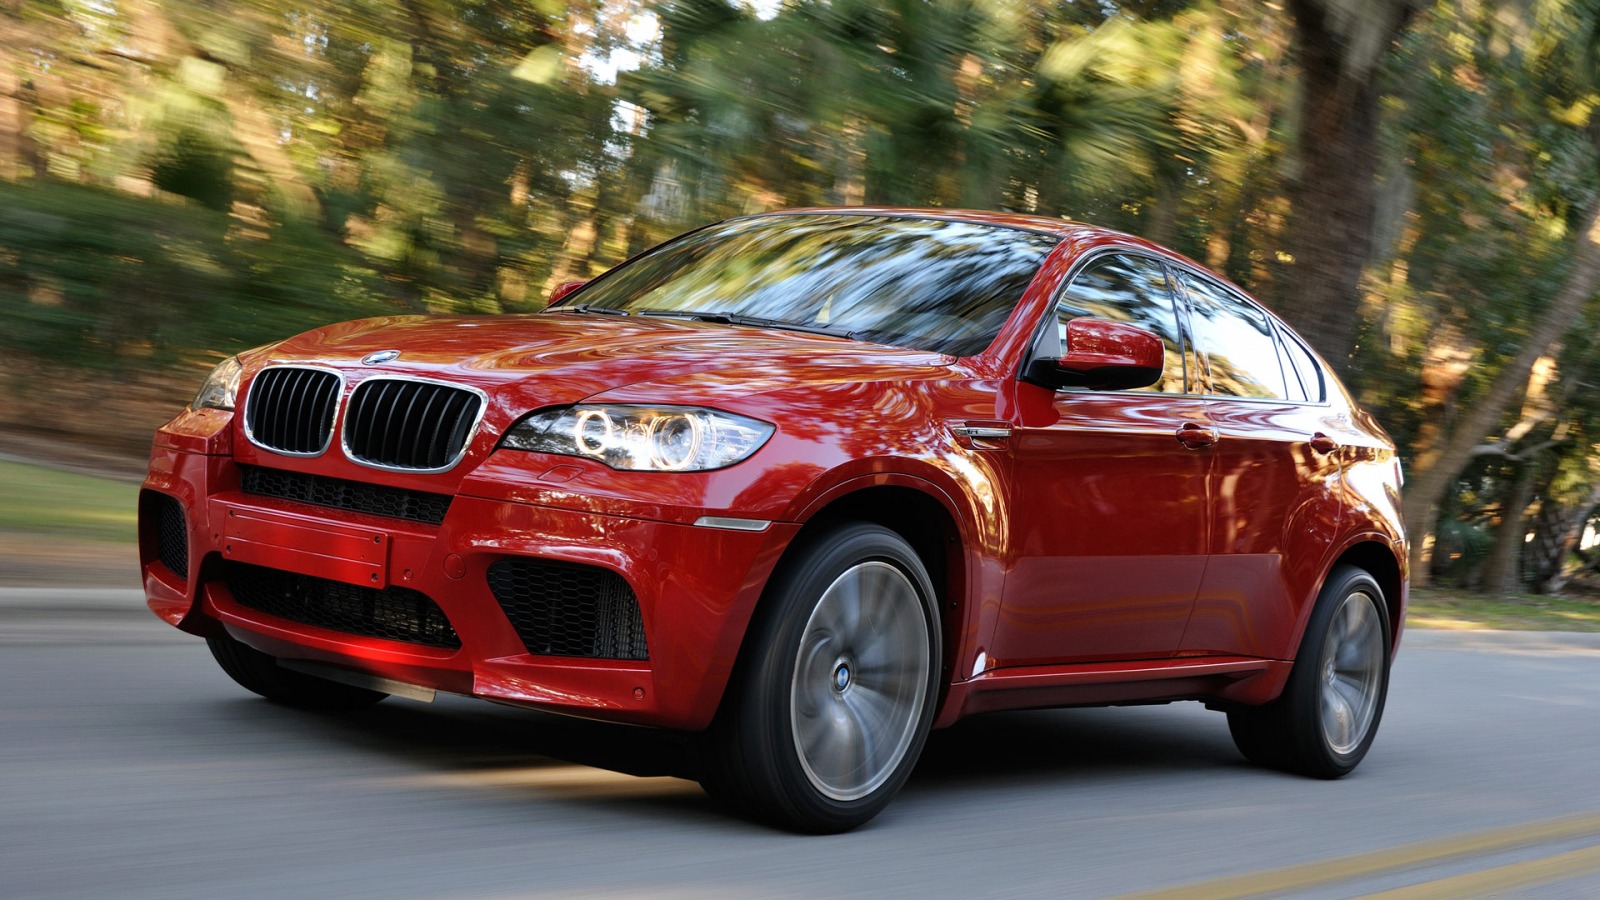 BMW X6 M Wallpaper BMW Cars Wallpapers in jpg format for free download